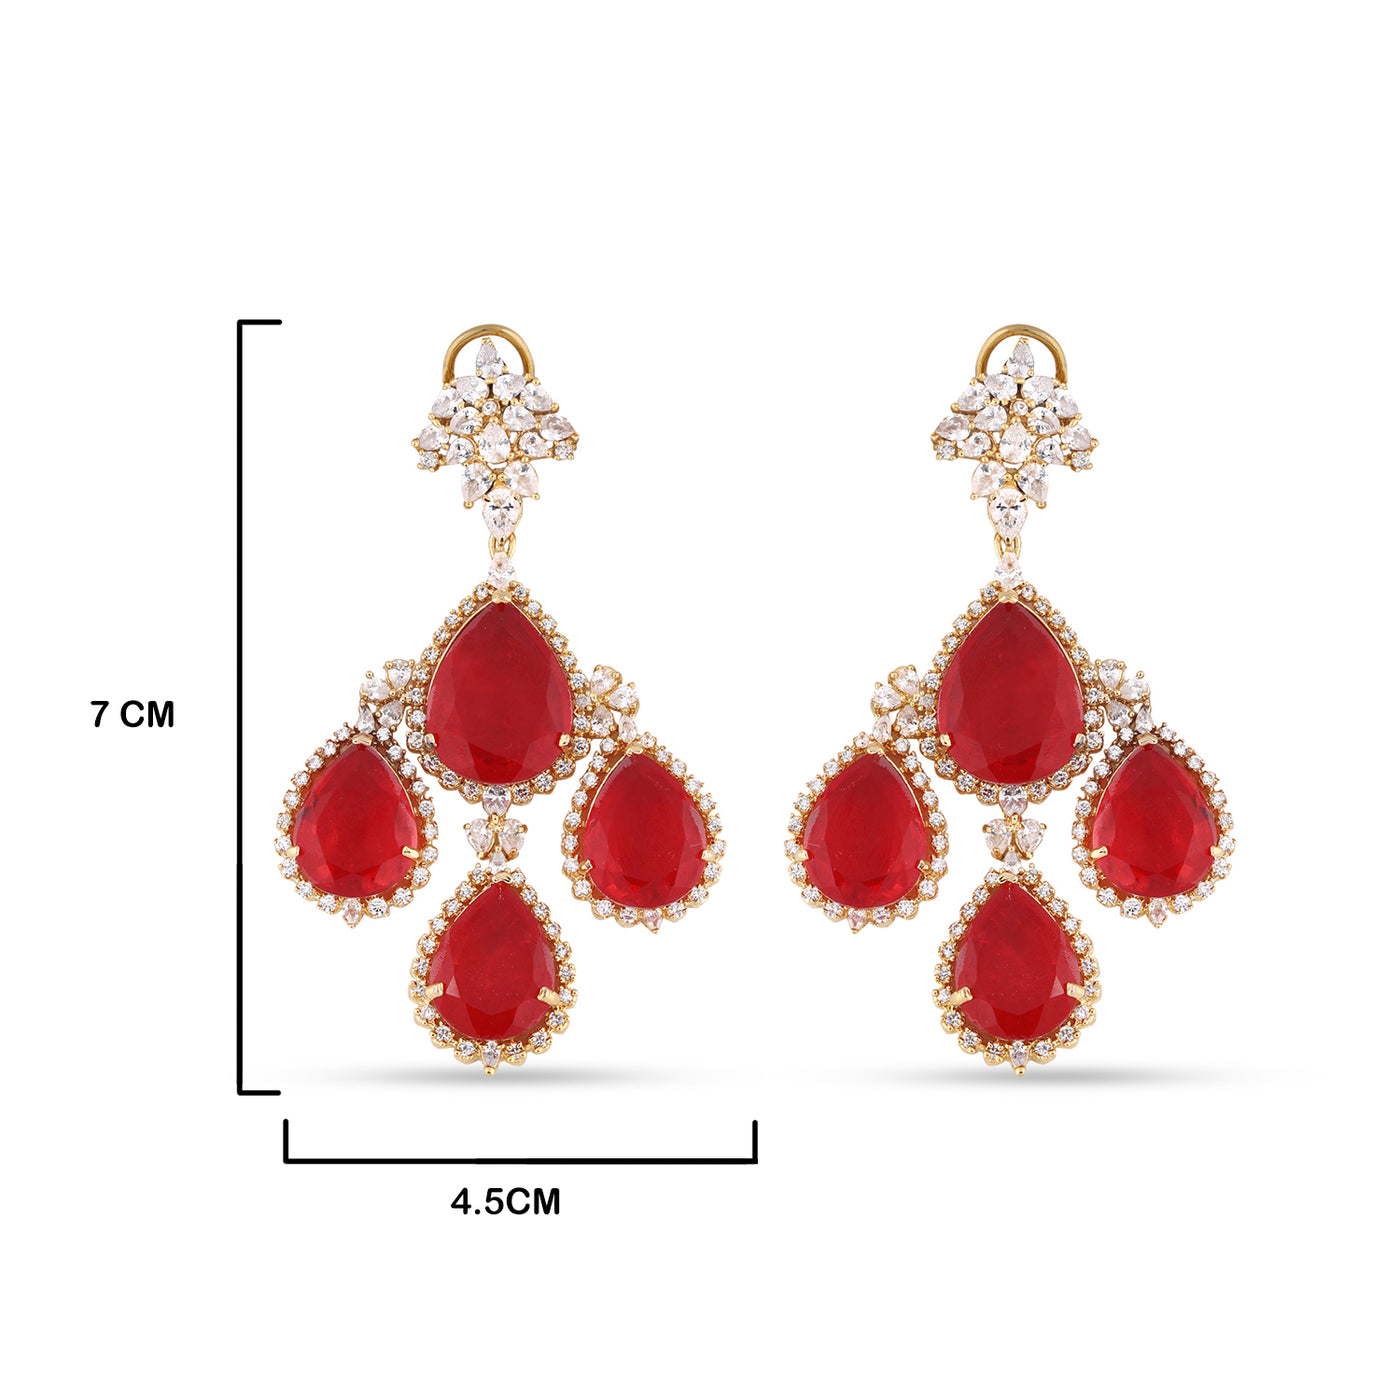 CZ and Red Stoned Kundan Earrings with measurements in cm. 7cm by 4.5cm.